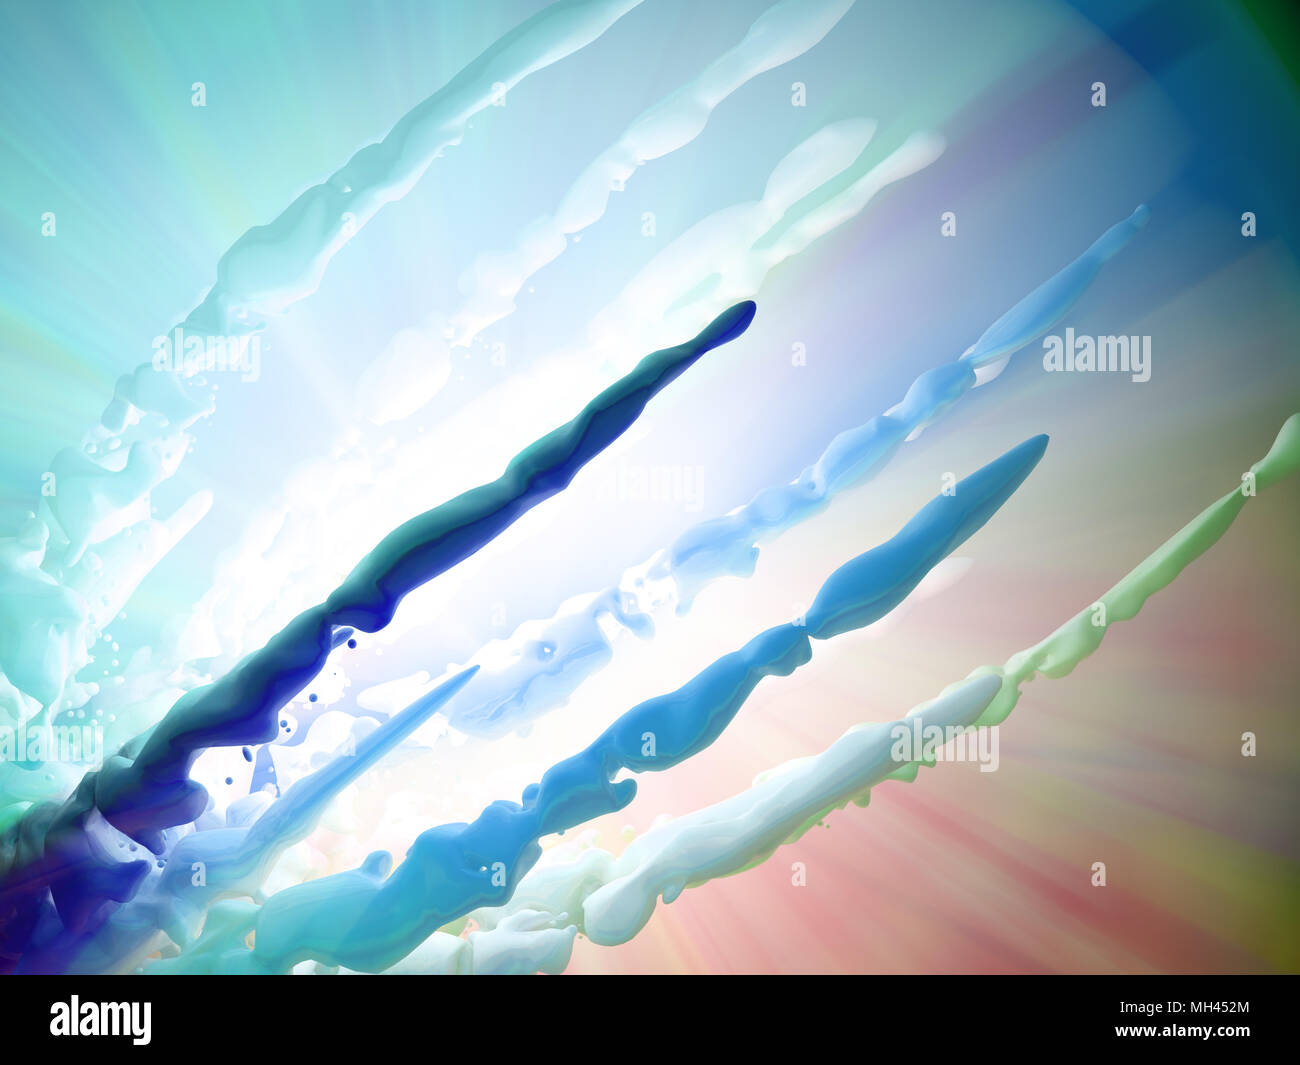 Cold light abstract 3d flow background, horizontal Stock Photo